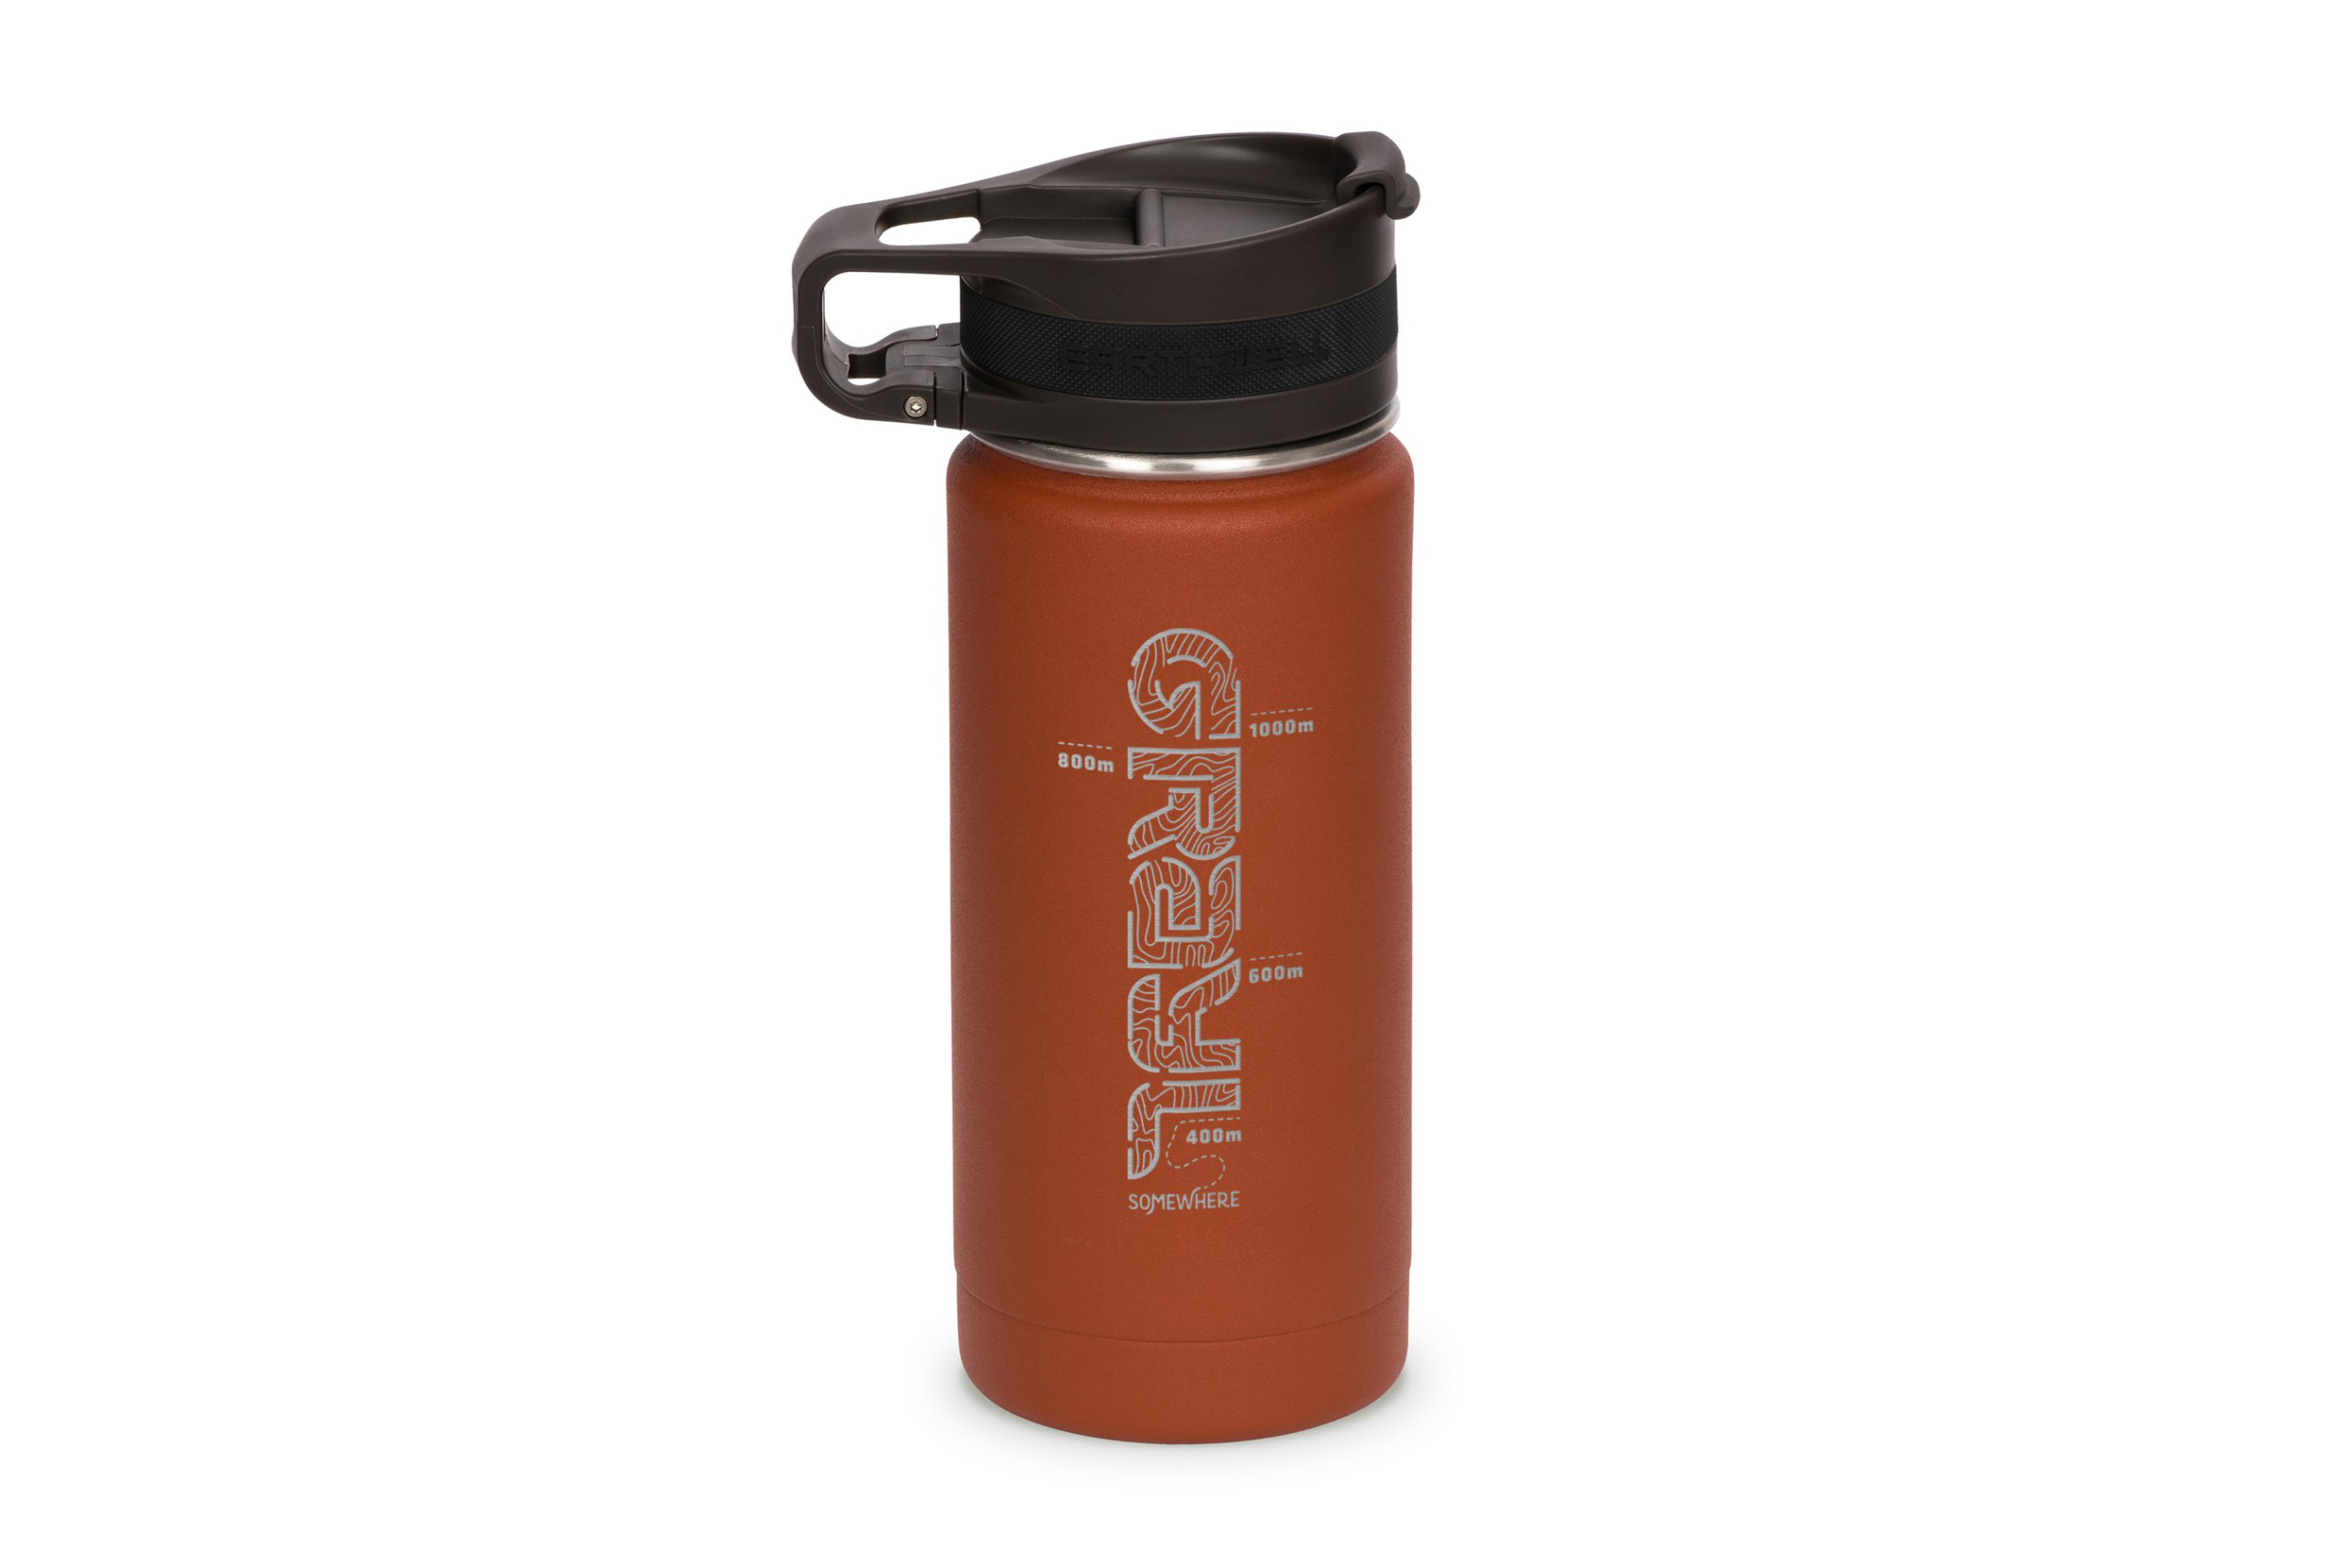 https://www.themanual.com/wp-content/uploads/sites/9/2020/11/earthwell-grayl-roaster-vacuum-insulated-water-bottle-scaled.jpg?fit=800%2C800&p=1